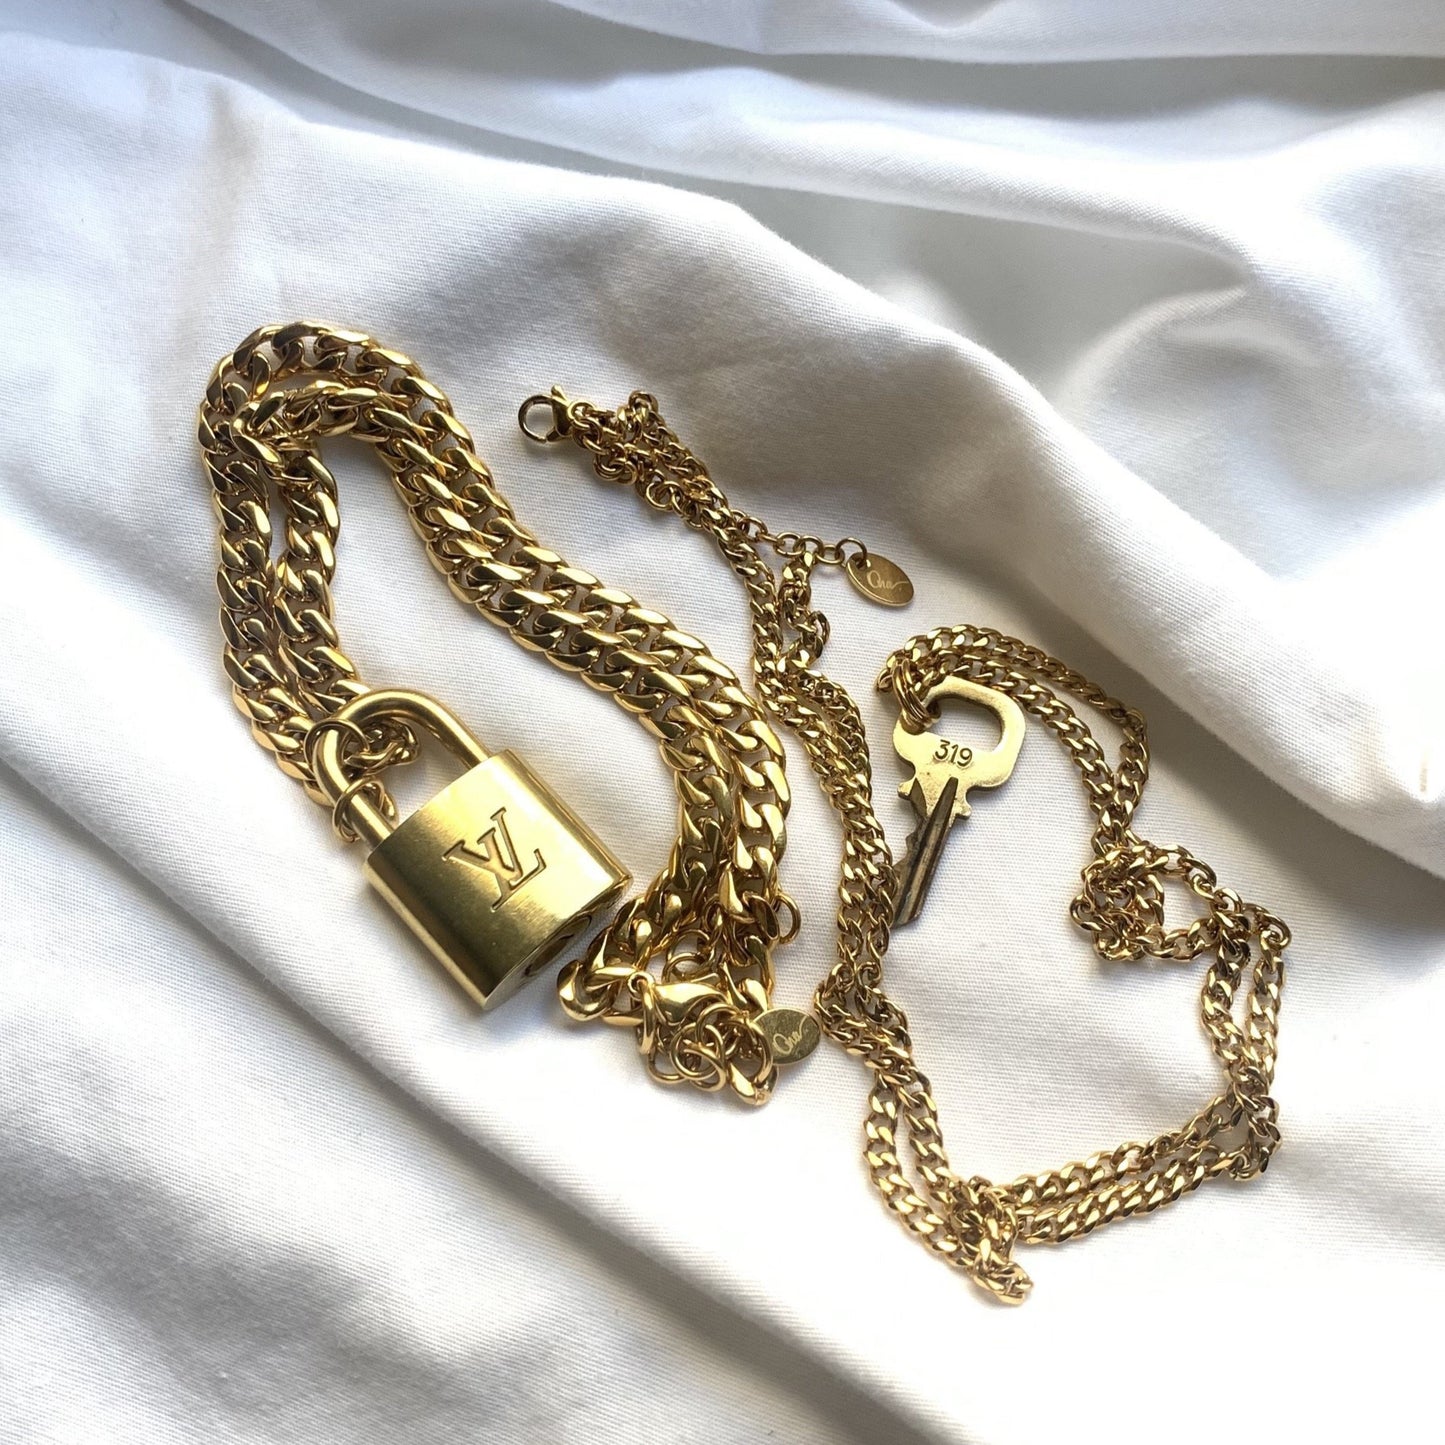 LV lock and key set with Cuban Chain link